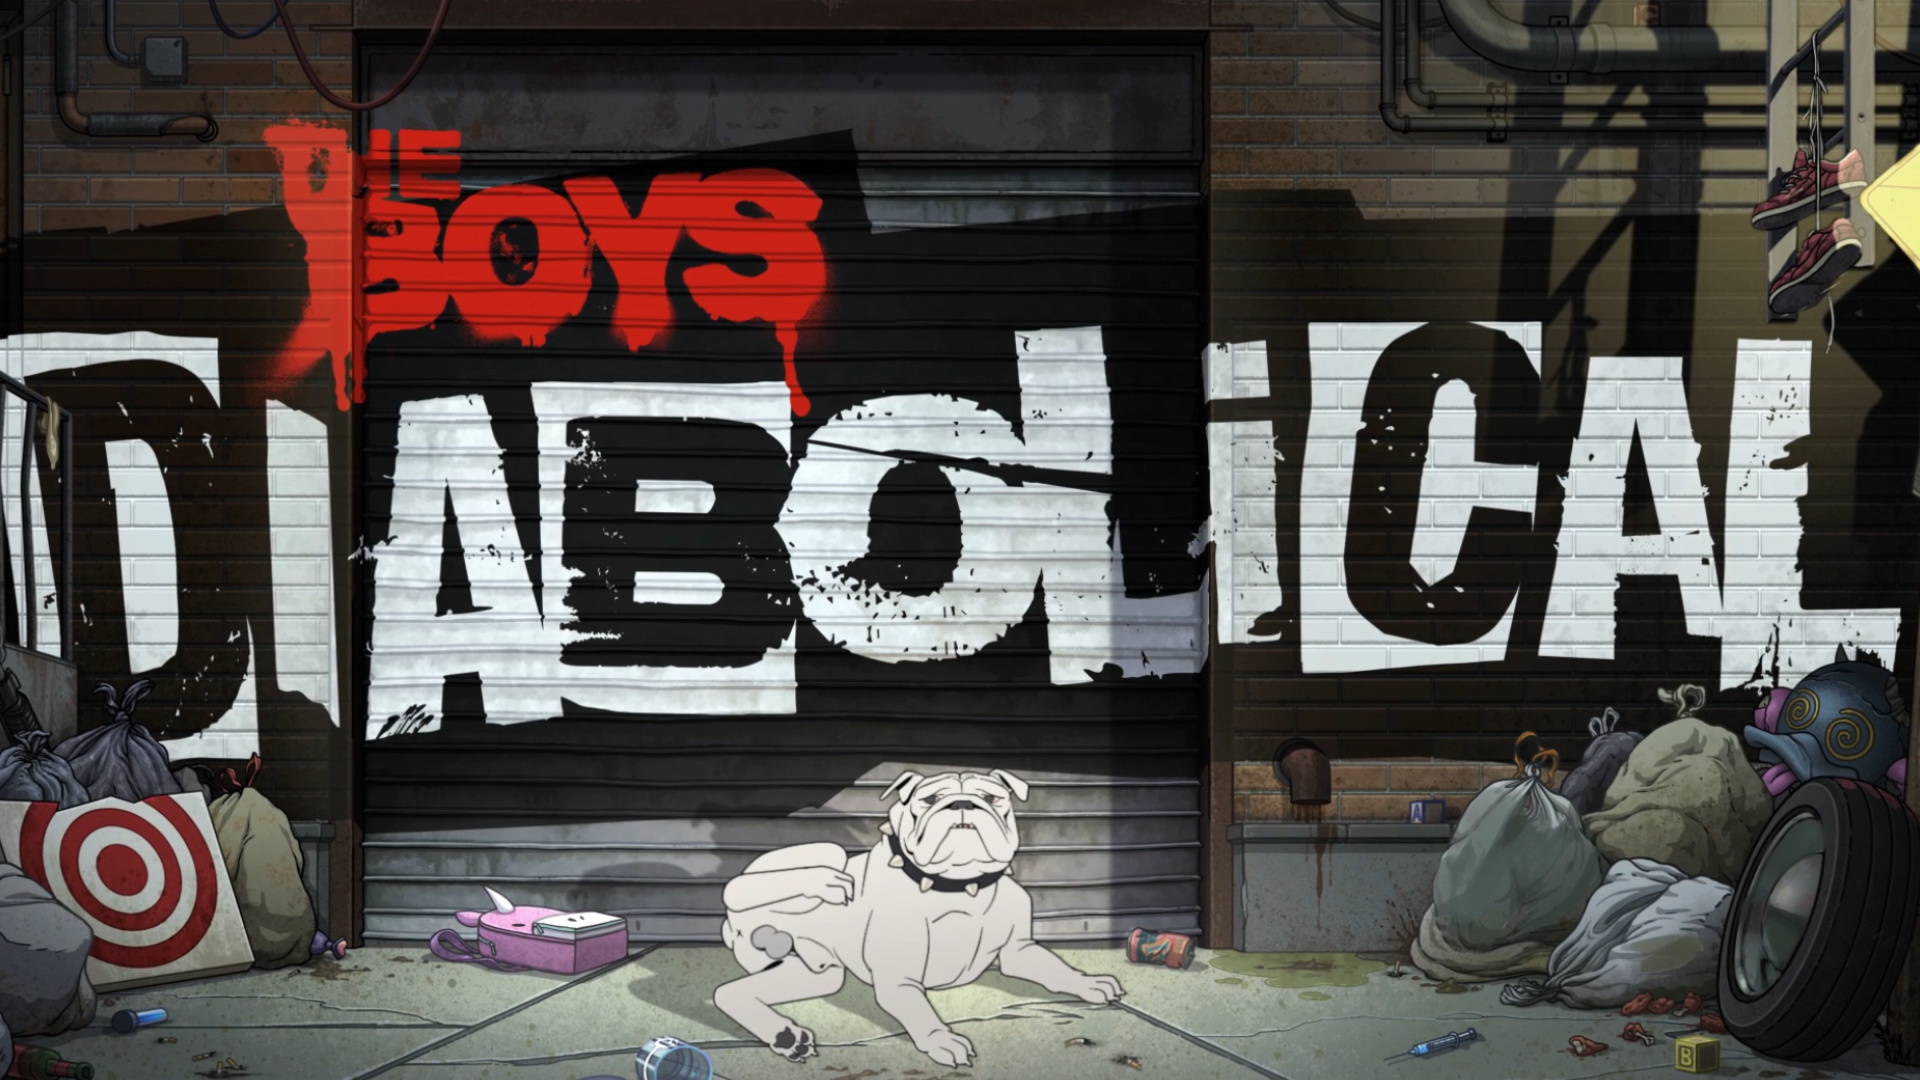 The Boys: Diabolical (TV Series 2022): The story examines the nature of power and how fame and remarkable ability can corrupt, Amazon. 1920x1080 Full HD Background.